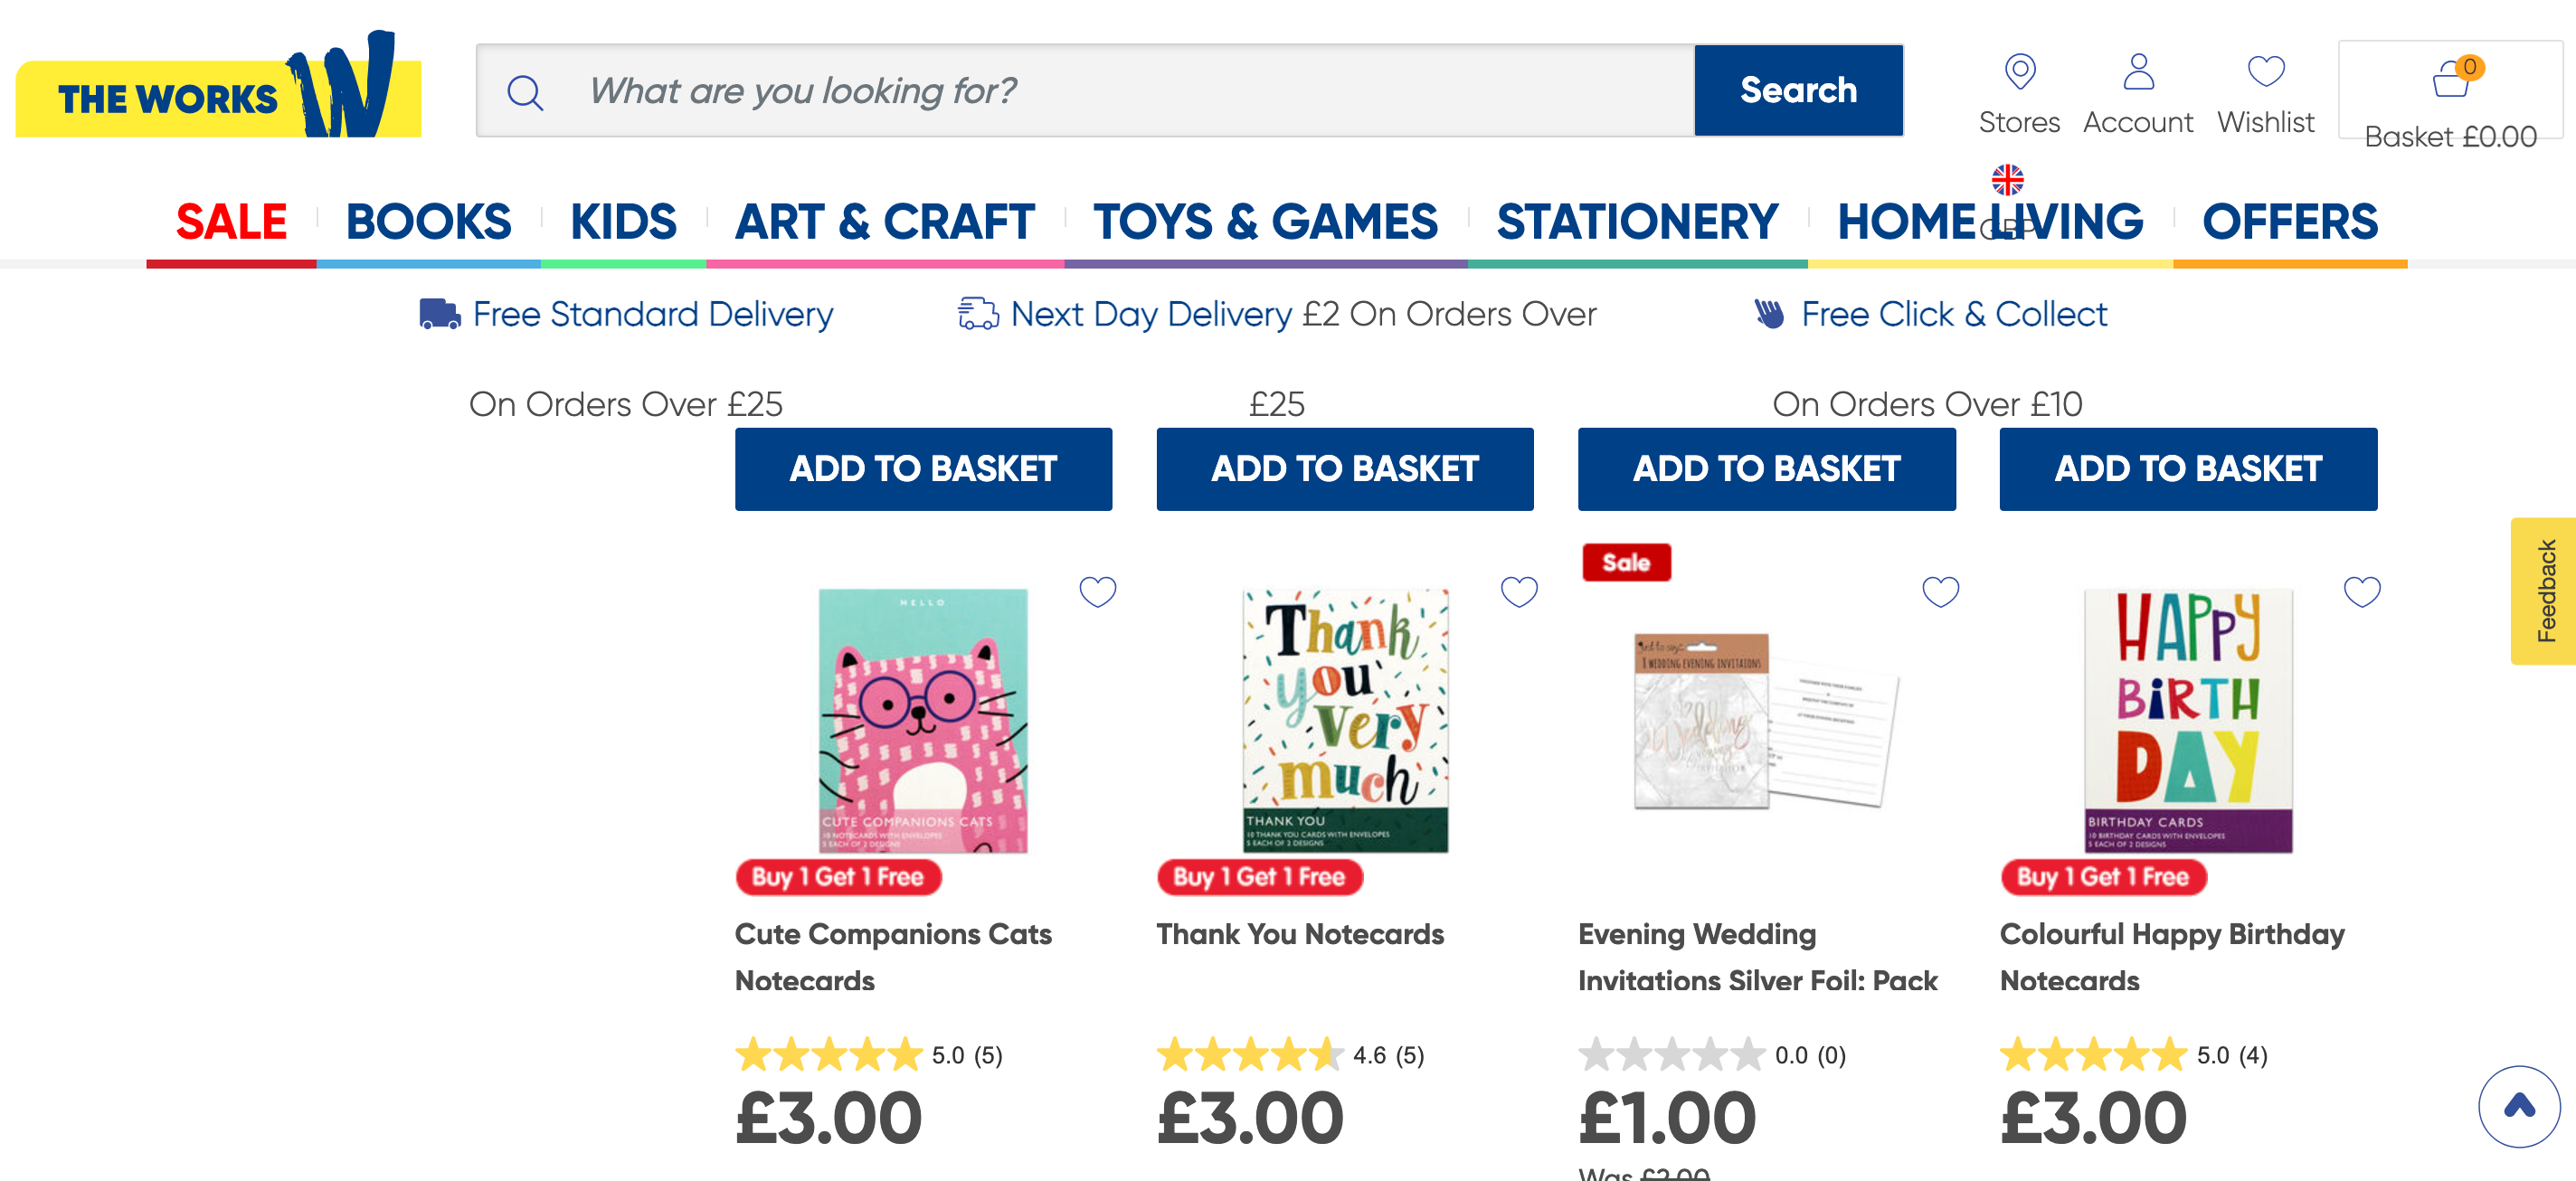 Above: The Works includes greeting cards in its varied offer